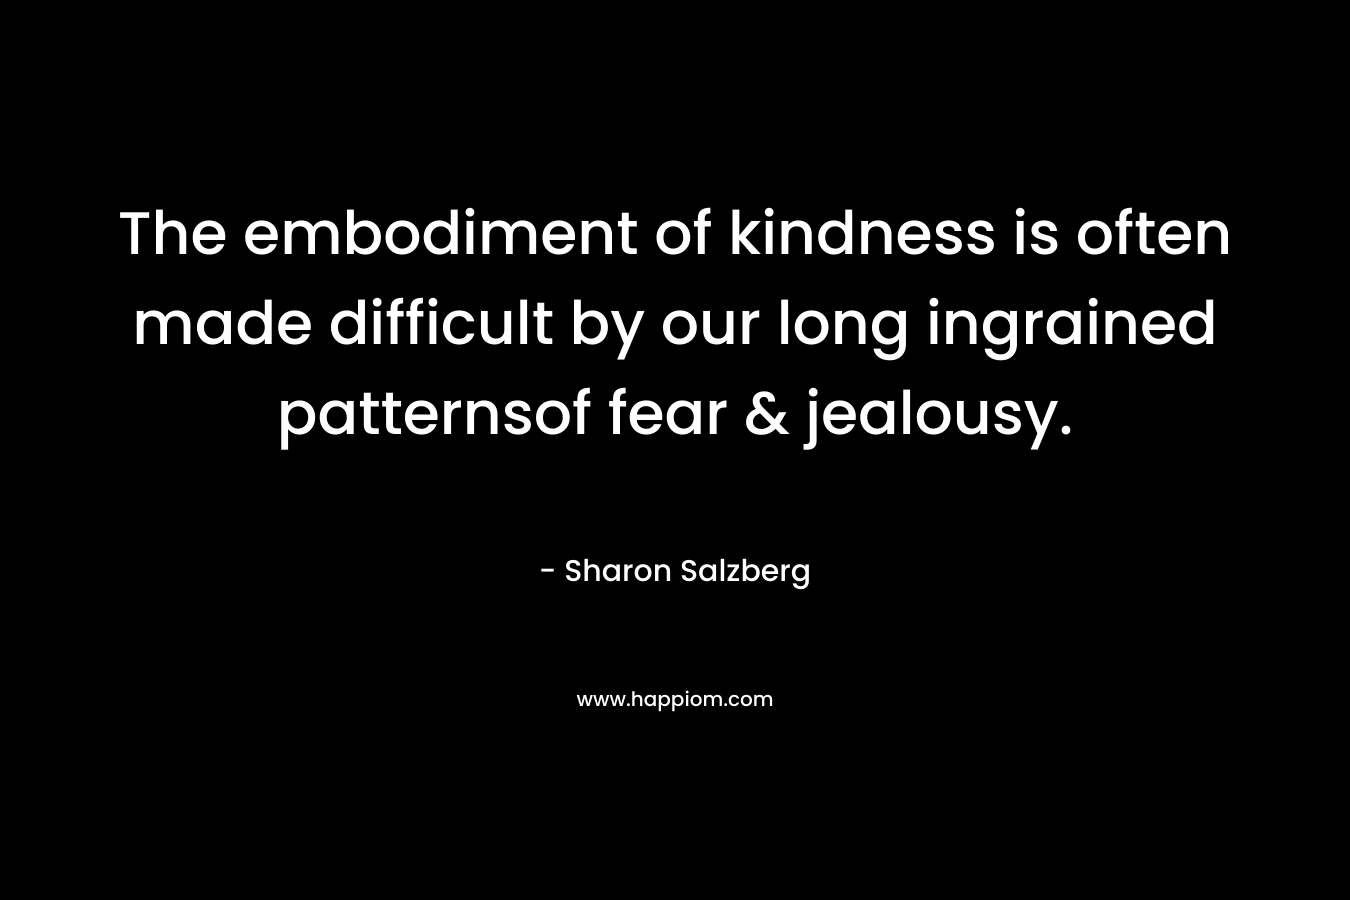 The embodiment of kindness is often made difficult by our long ingrained patternsof fear & jealousy.